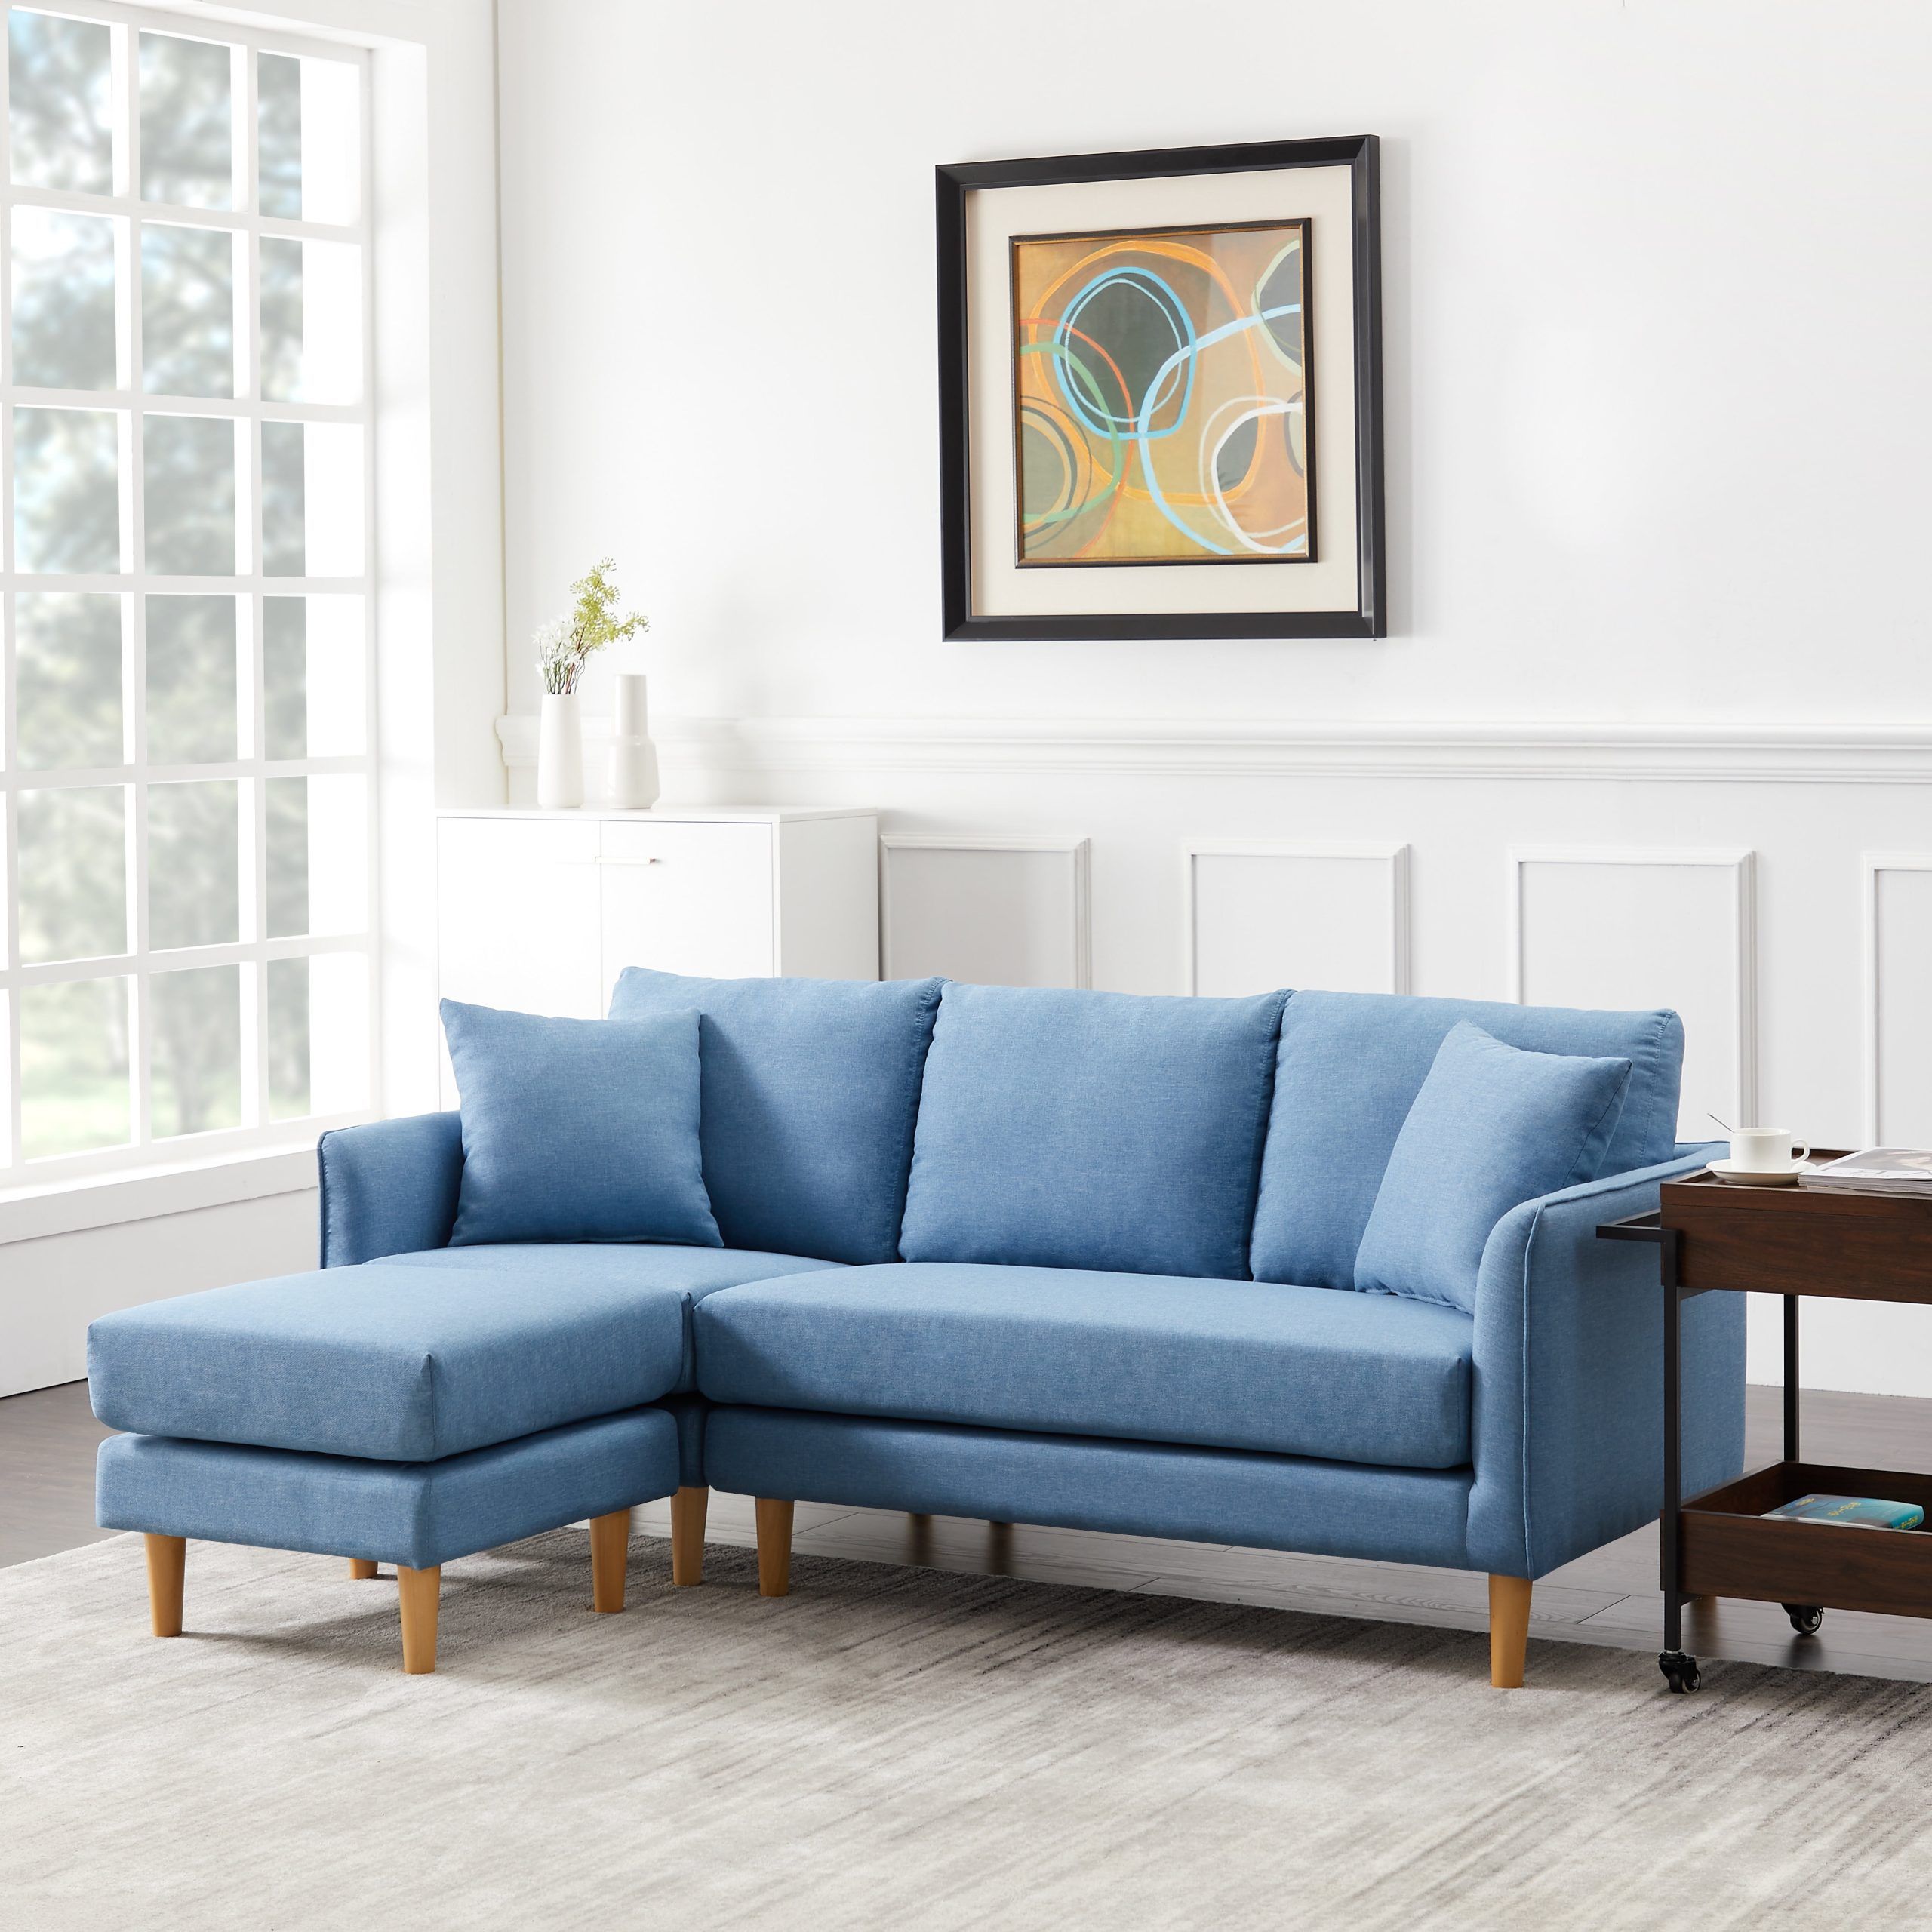 Uhomepro Convertible Sectional Sofa Couch, 74"w L Shaped Couch With Throughout Sofas For Compact Living (View 11 of 20)